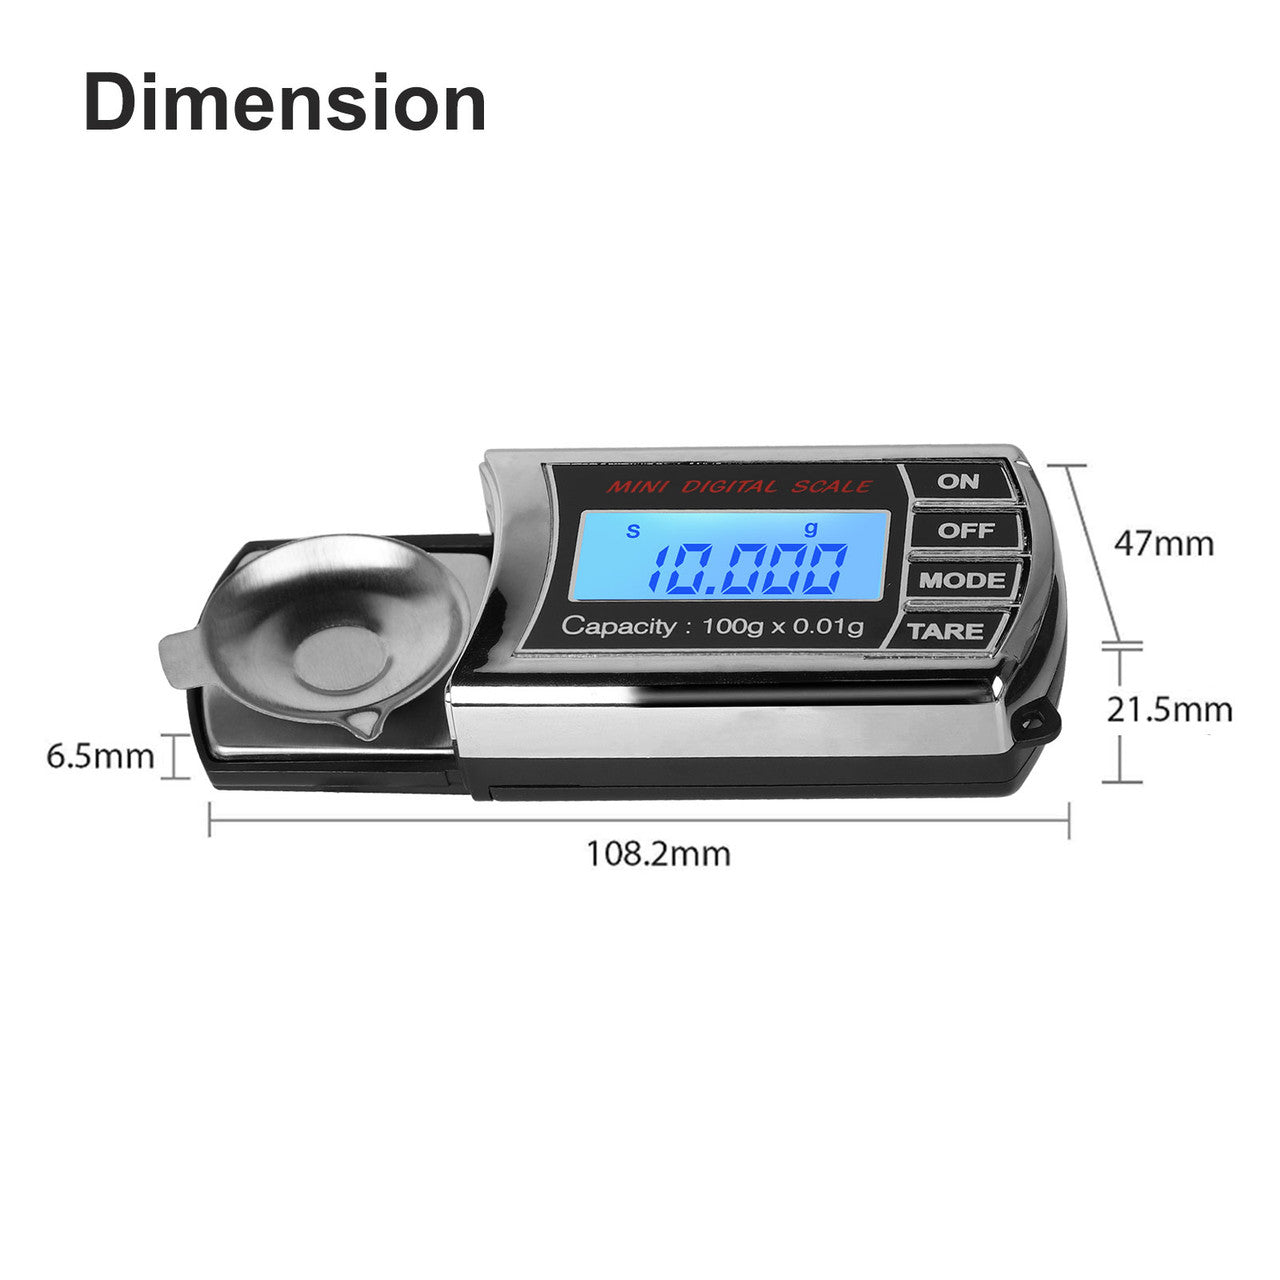 Digital Mini Turntable Stylus Force Scale Gauge Tester 0.01g Resolution LP Digital Turntable Stylus Force Scale Gauge with Blue LCD Backlight for Tonearm Phono Cartridge Jewellery Scale Weighing